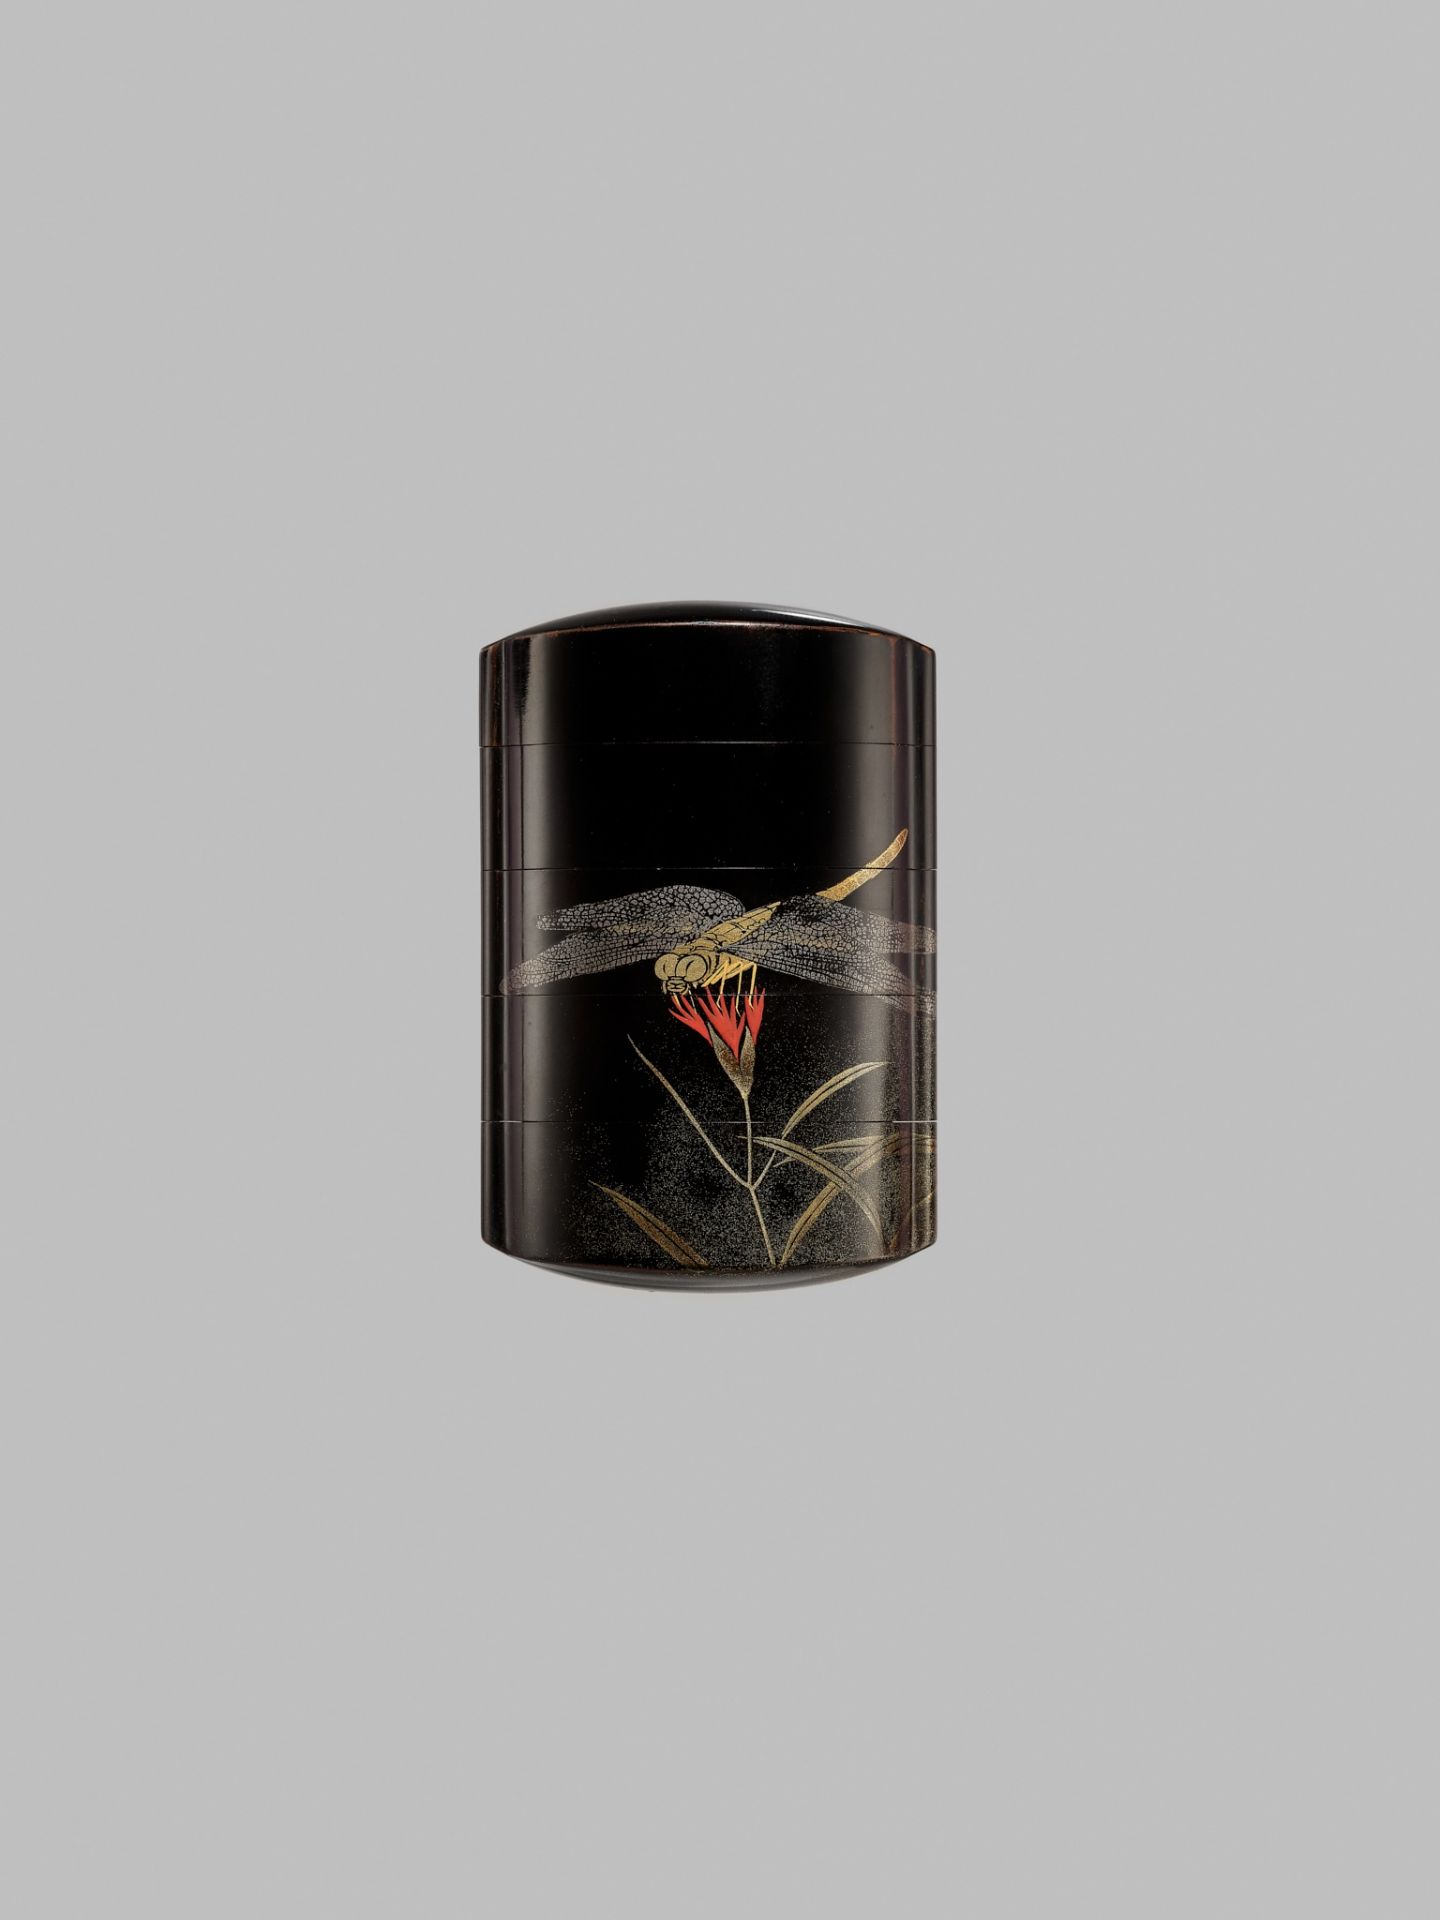 MOEI: A SUPERB FOUR-CASE TOGIDASHI LACQUER INRO DEPICTING A DRAGONFLY - Image 3 of 7